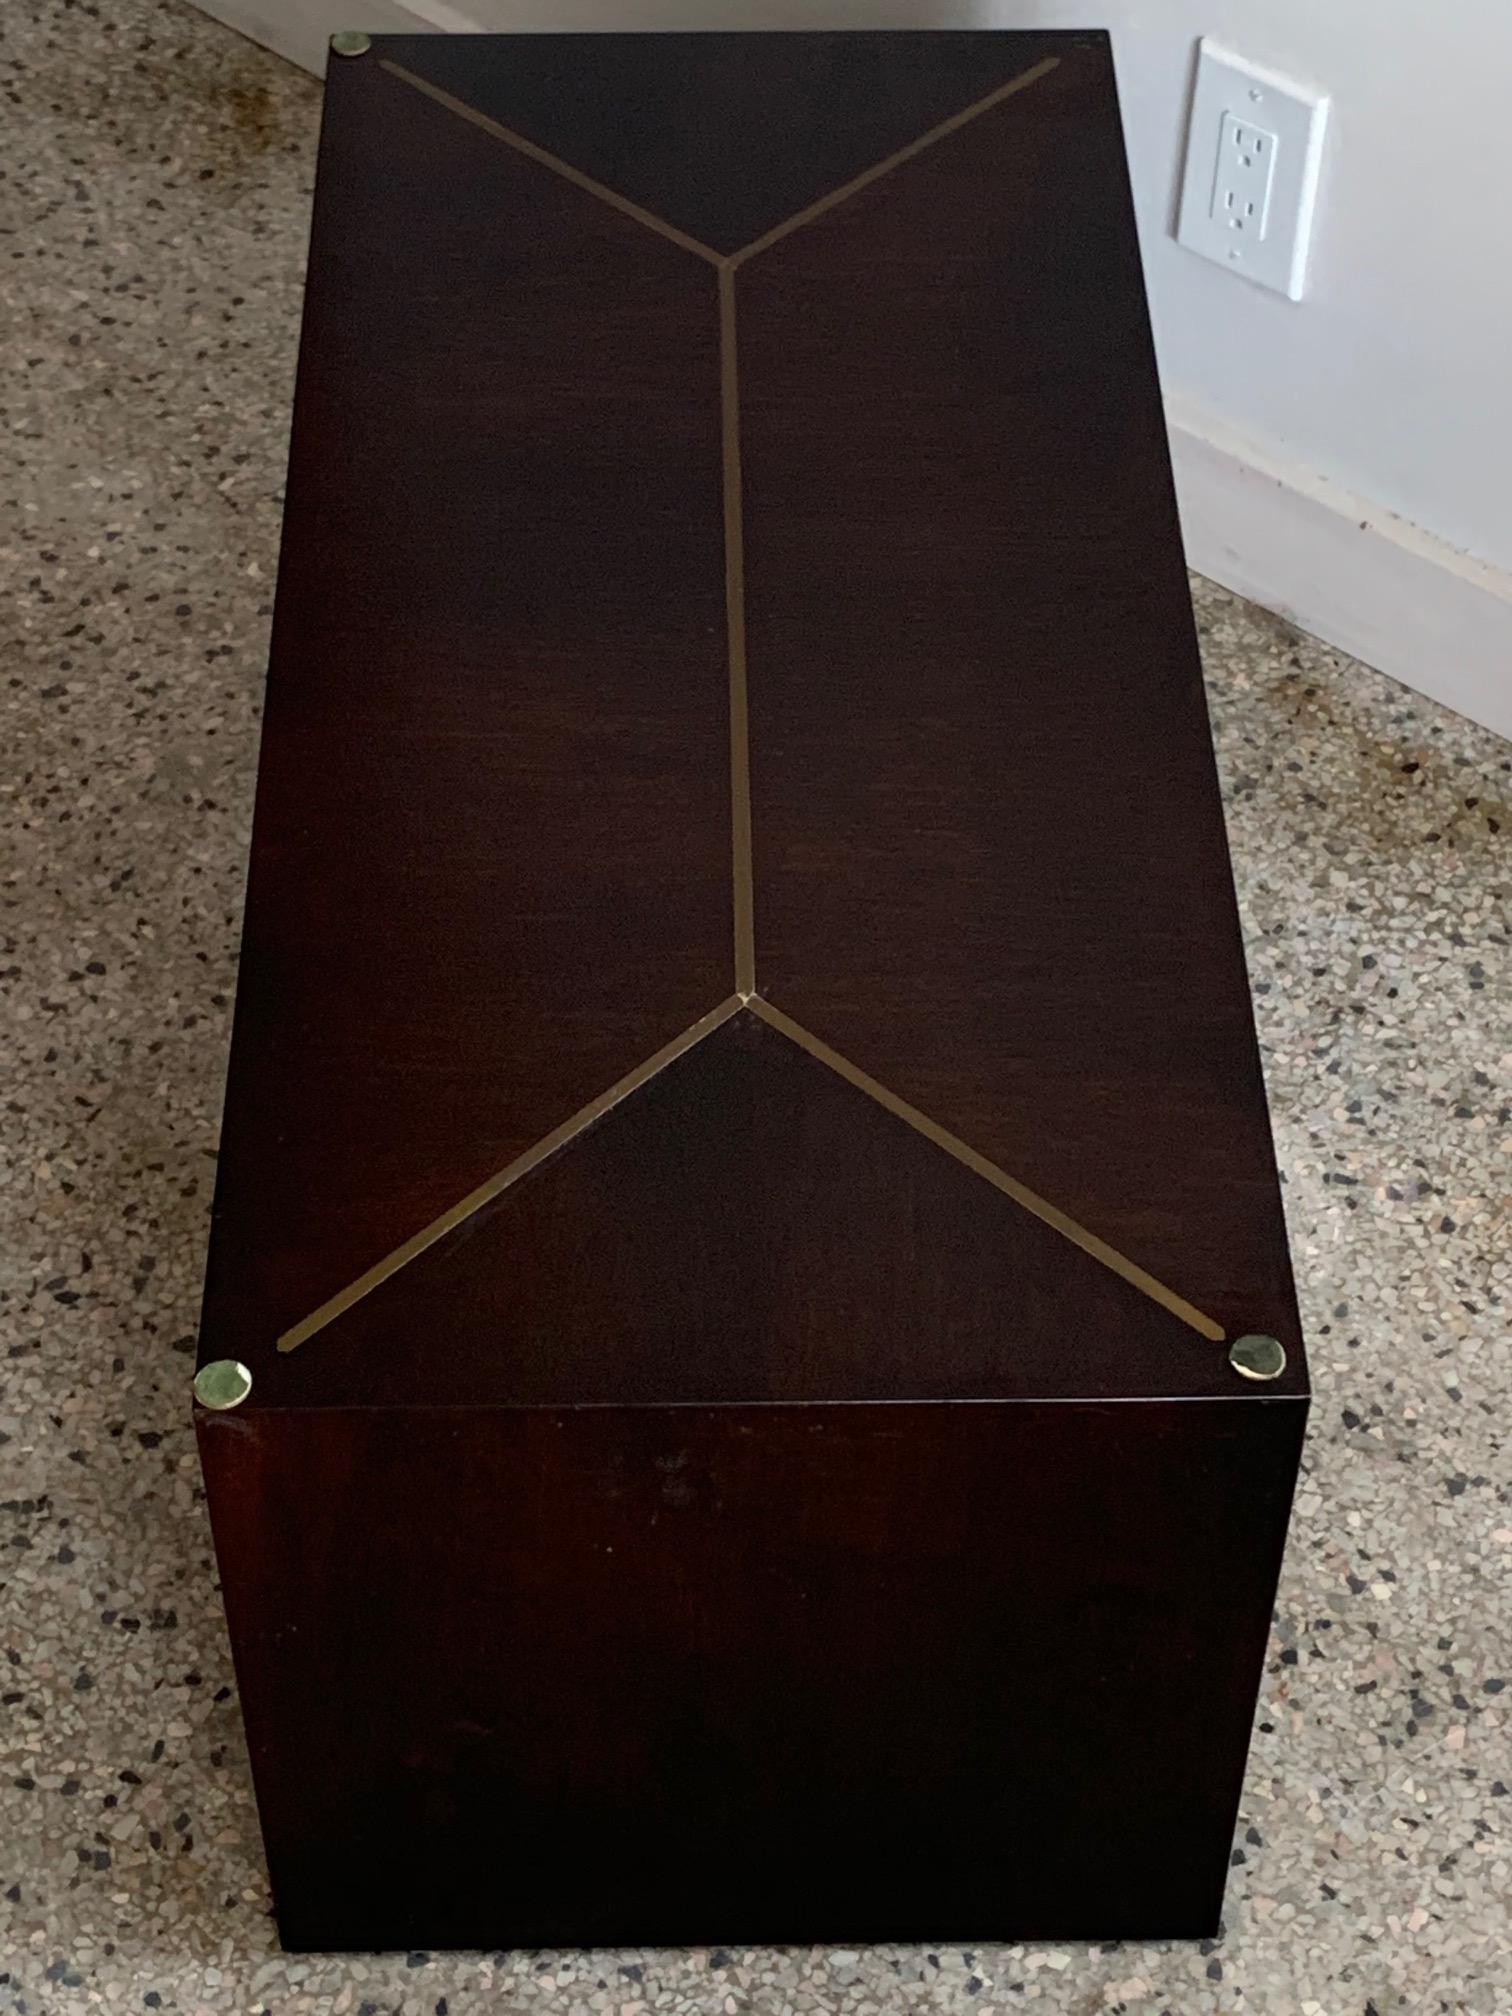 An interesting custom cube table made by Dunbar. With brass inlay could be a pedestal or coffee table.